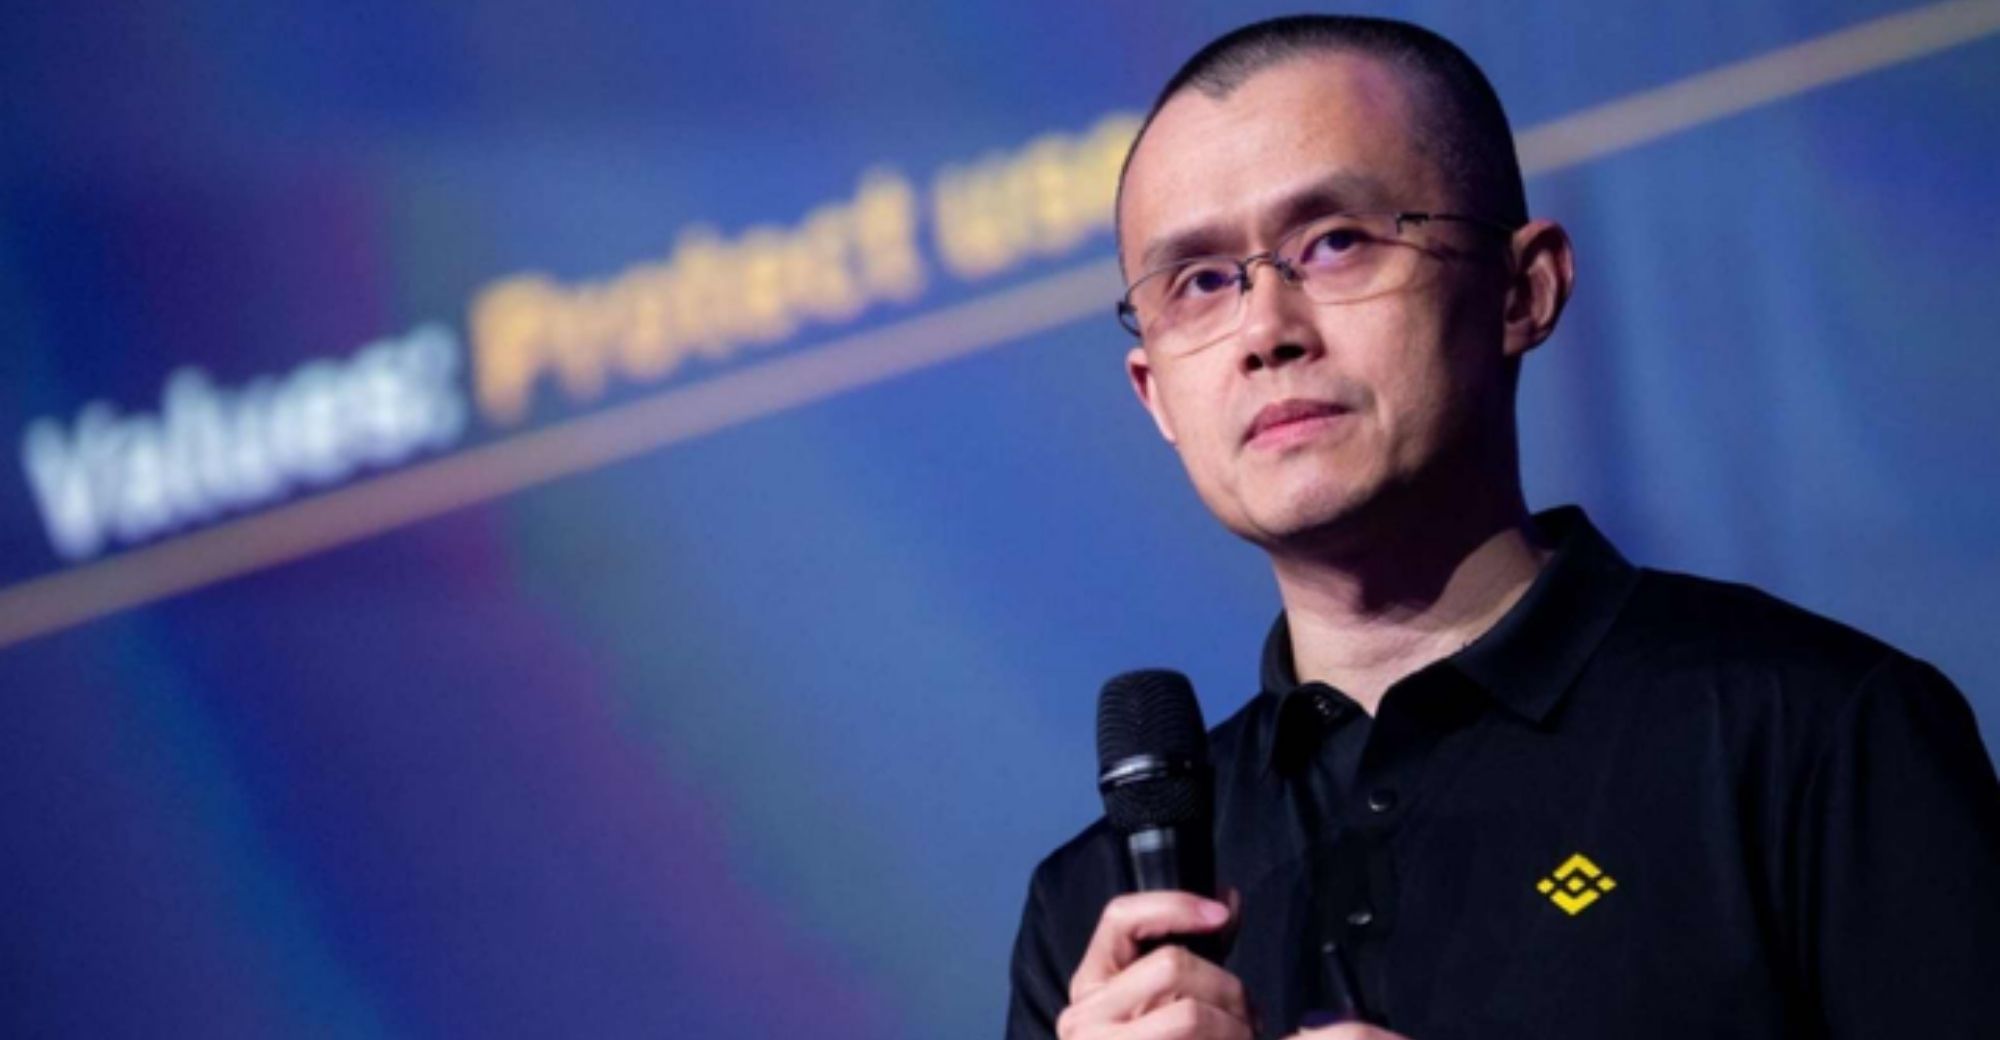 The U.S. Commodity Futures Trading Commission Sues Binance Founder CZ